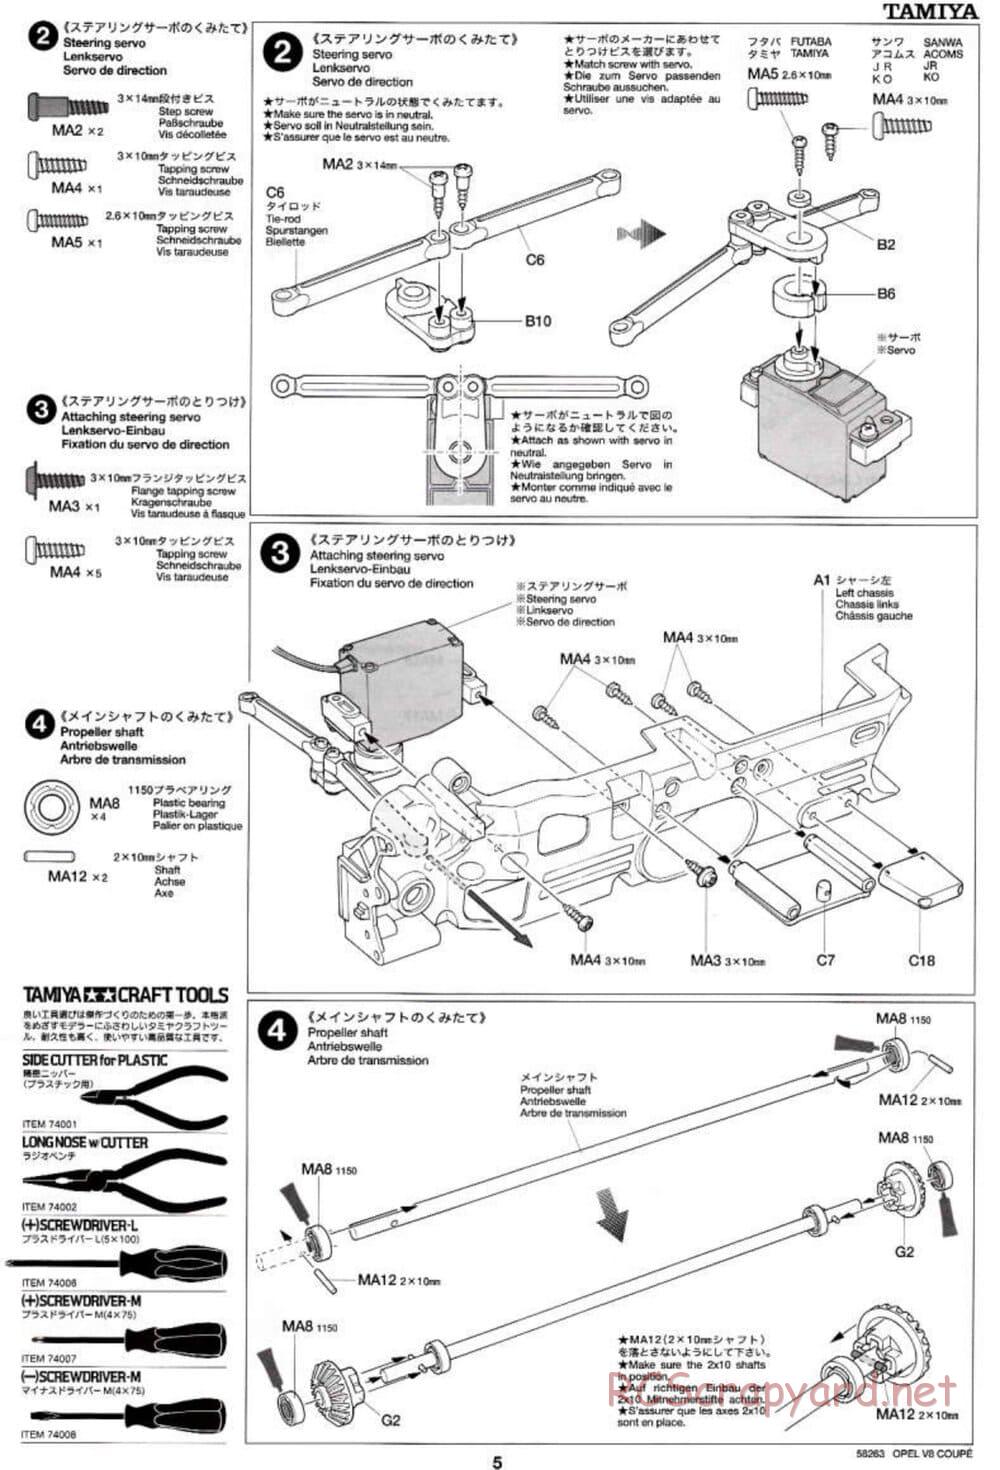 Tamiya - Opel V8 Coupe - TL-01 Chassis - Manual - Page 5